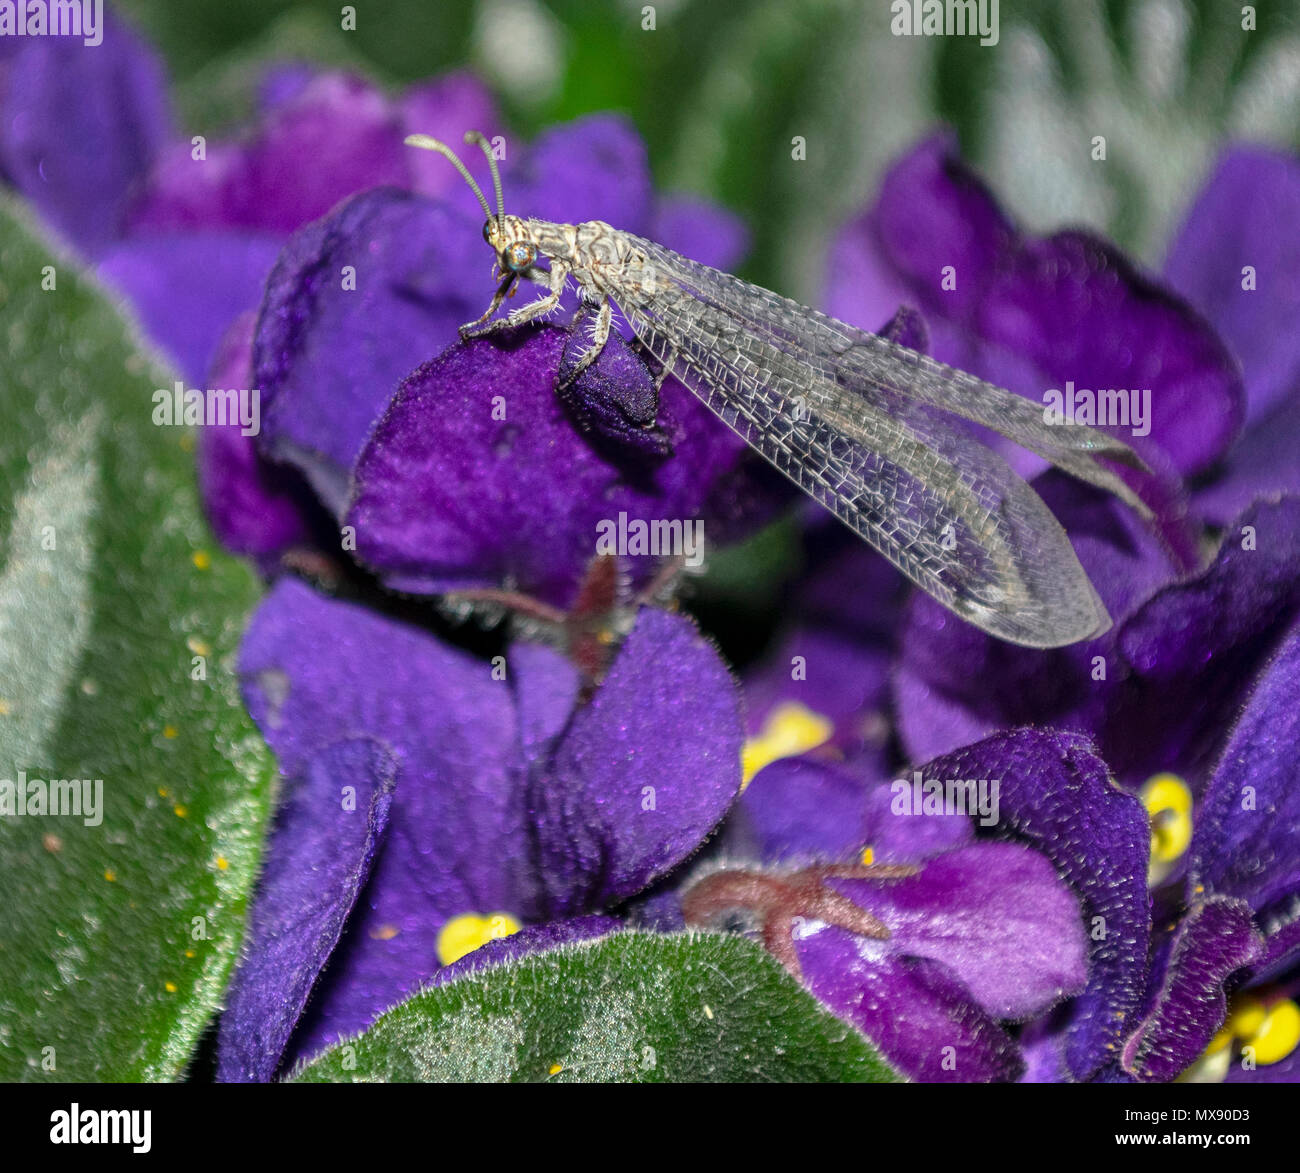 a lacewing antlion insect resting on purple african violet flowers Stock Photo